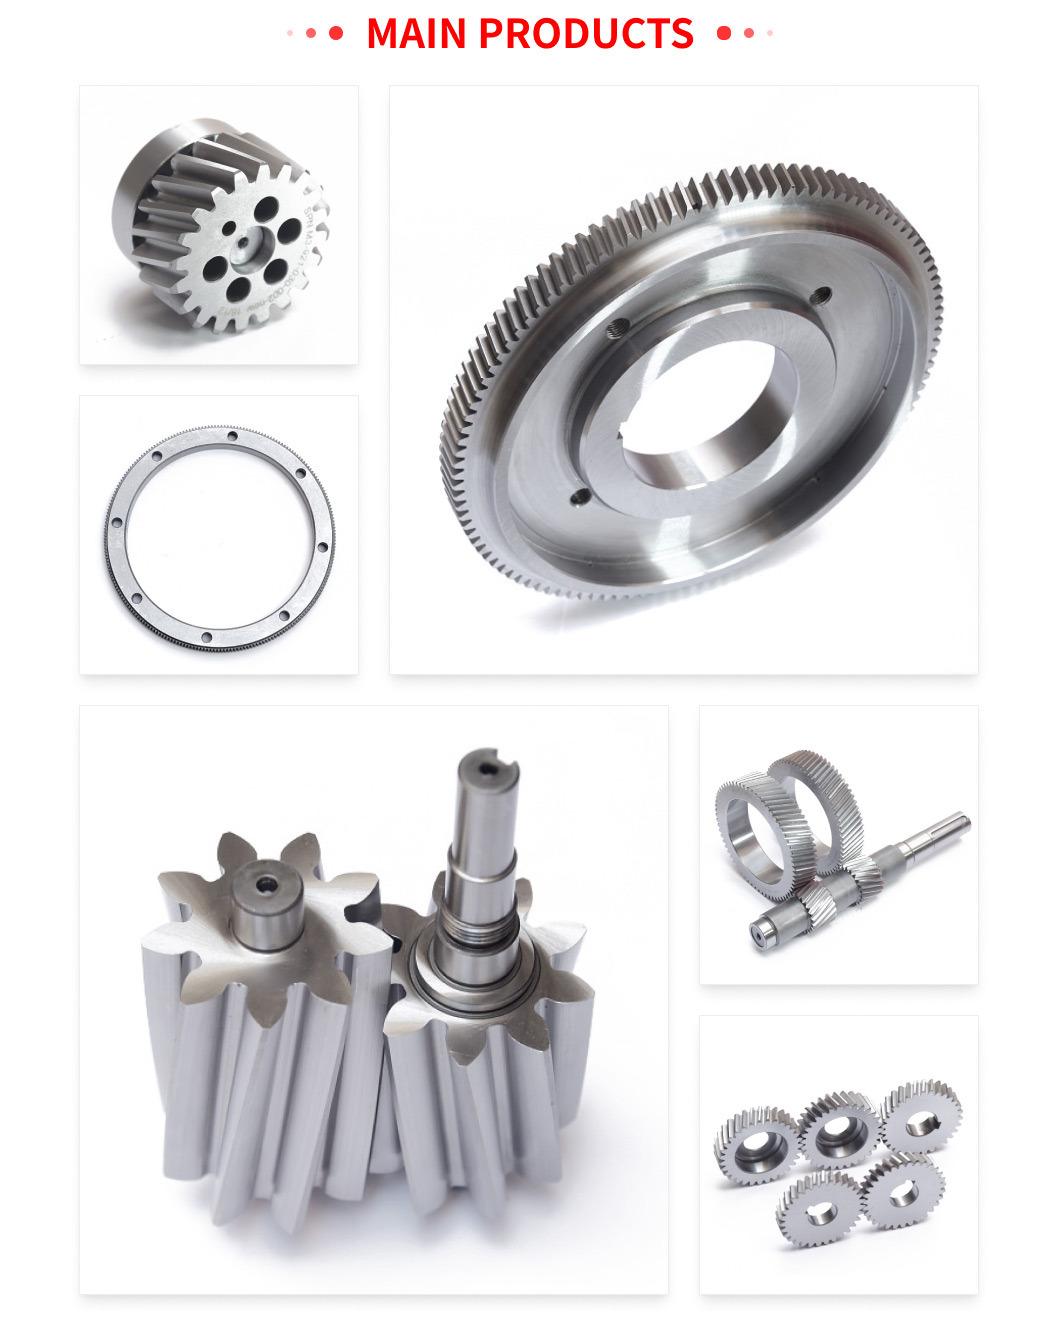 Machinery Spur OEM Hard External Rack Cylindrical Helical Gear with Low Price